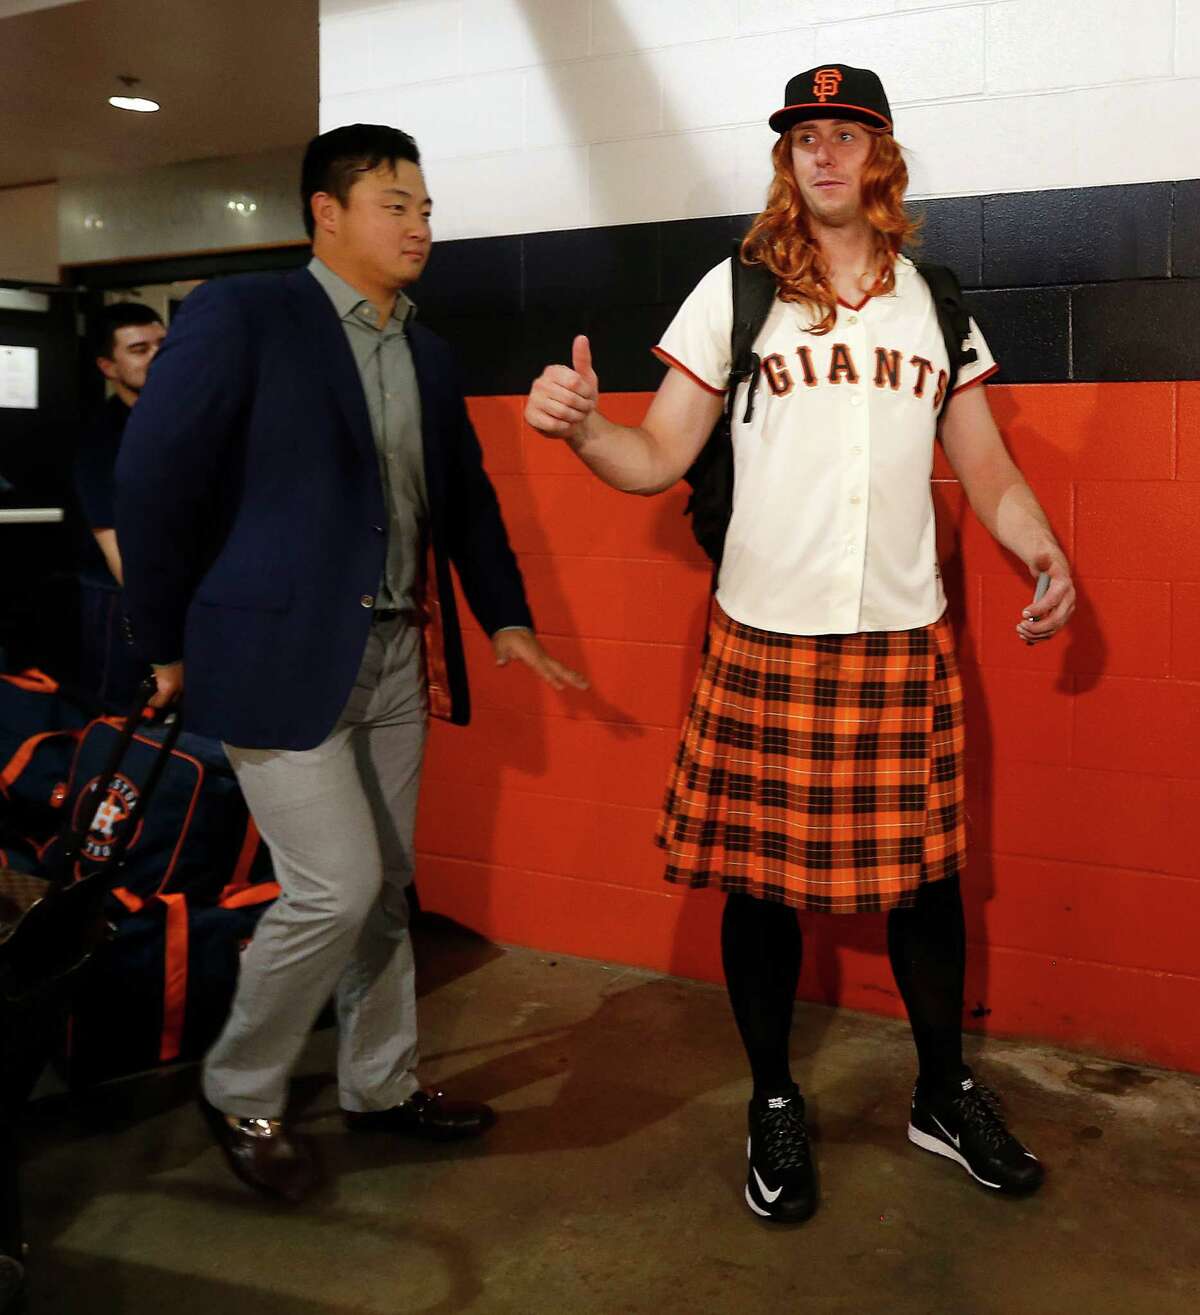 Matt Duffy, right, was one of the Astros' rookies who had to travel to Seattle in costume, with his kilt and Giants jersey ensemble an homage to the San Francisco rookie of the same name.